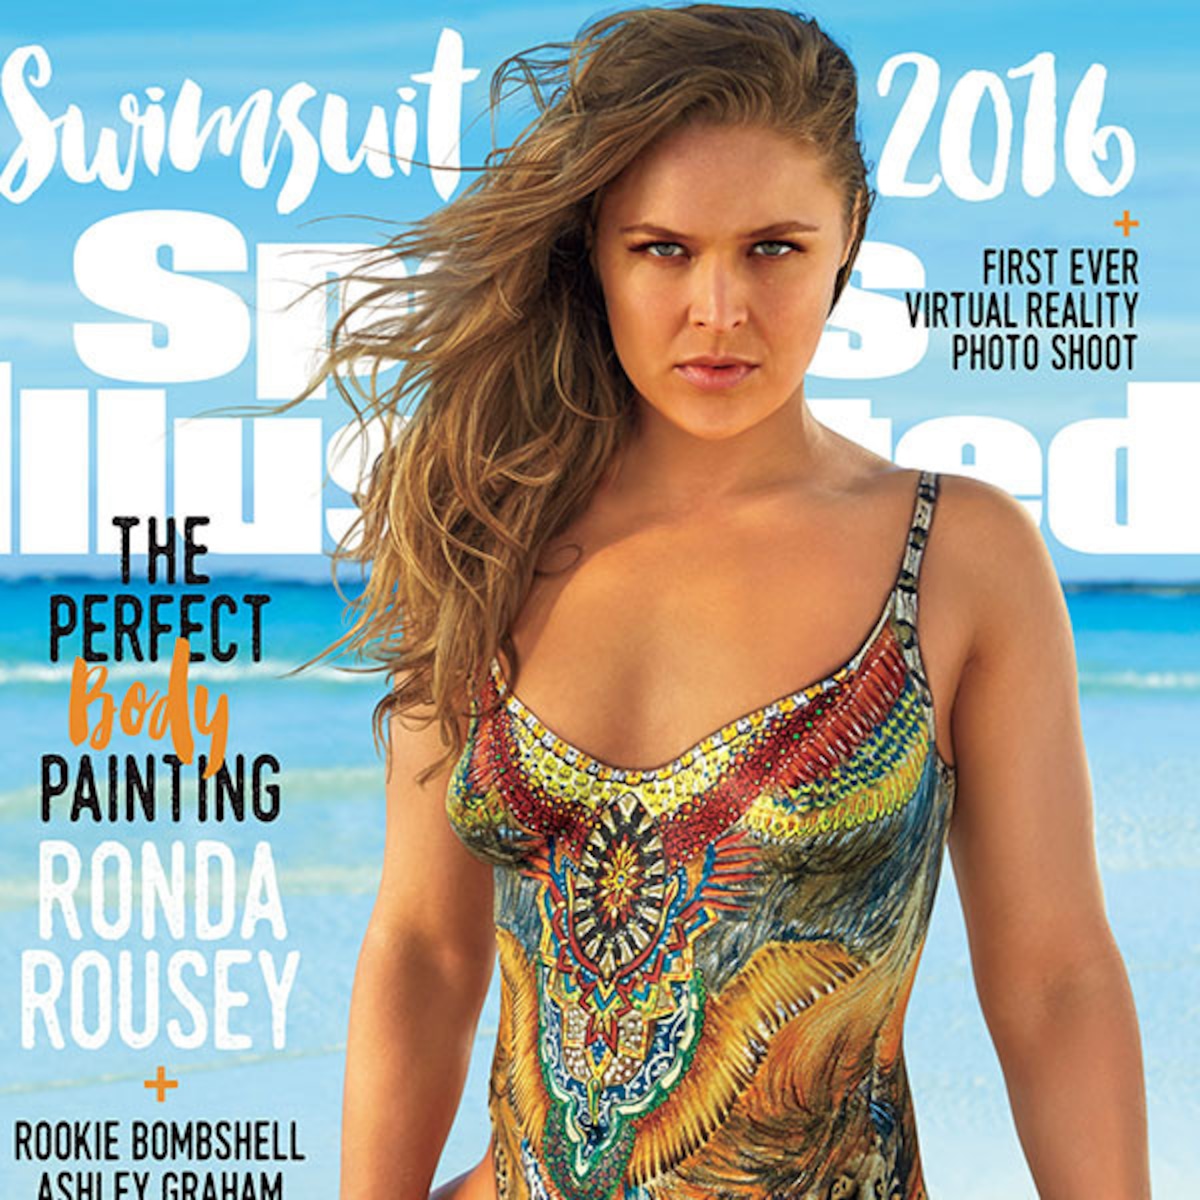 sports illustrated cover